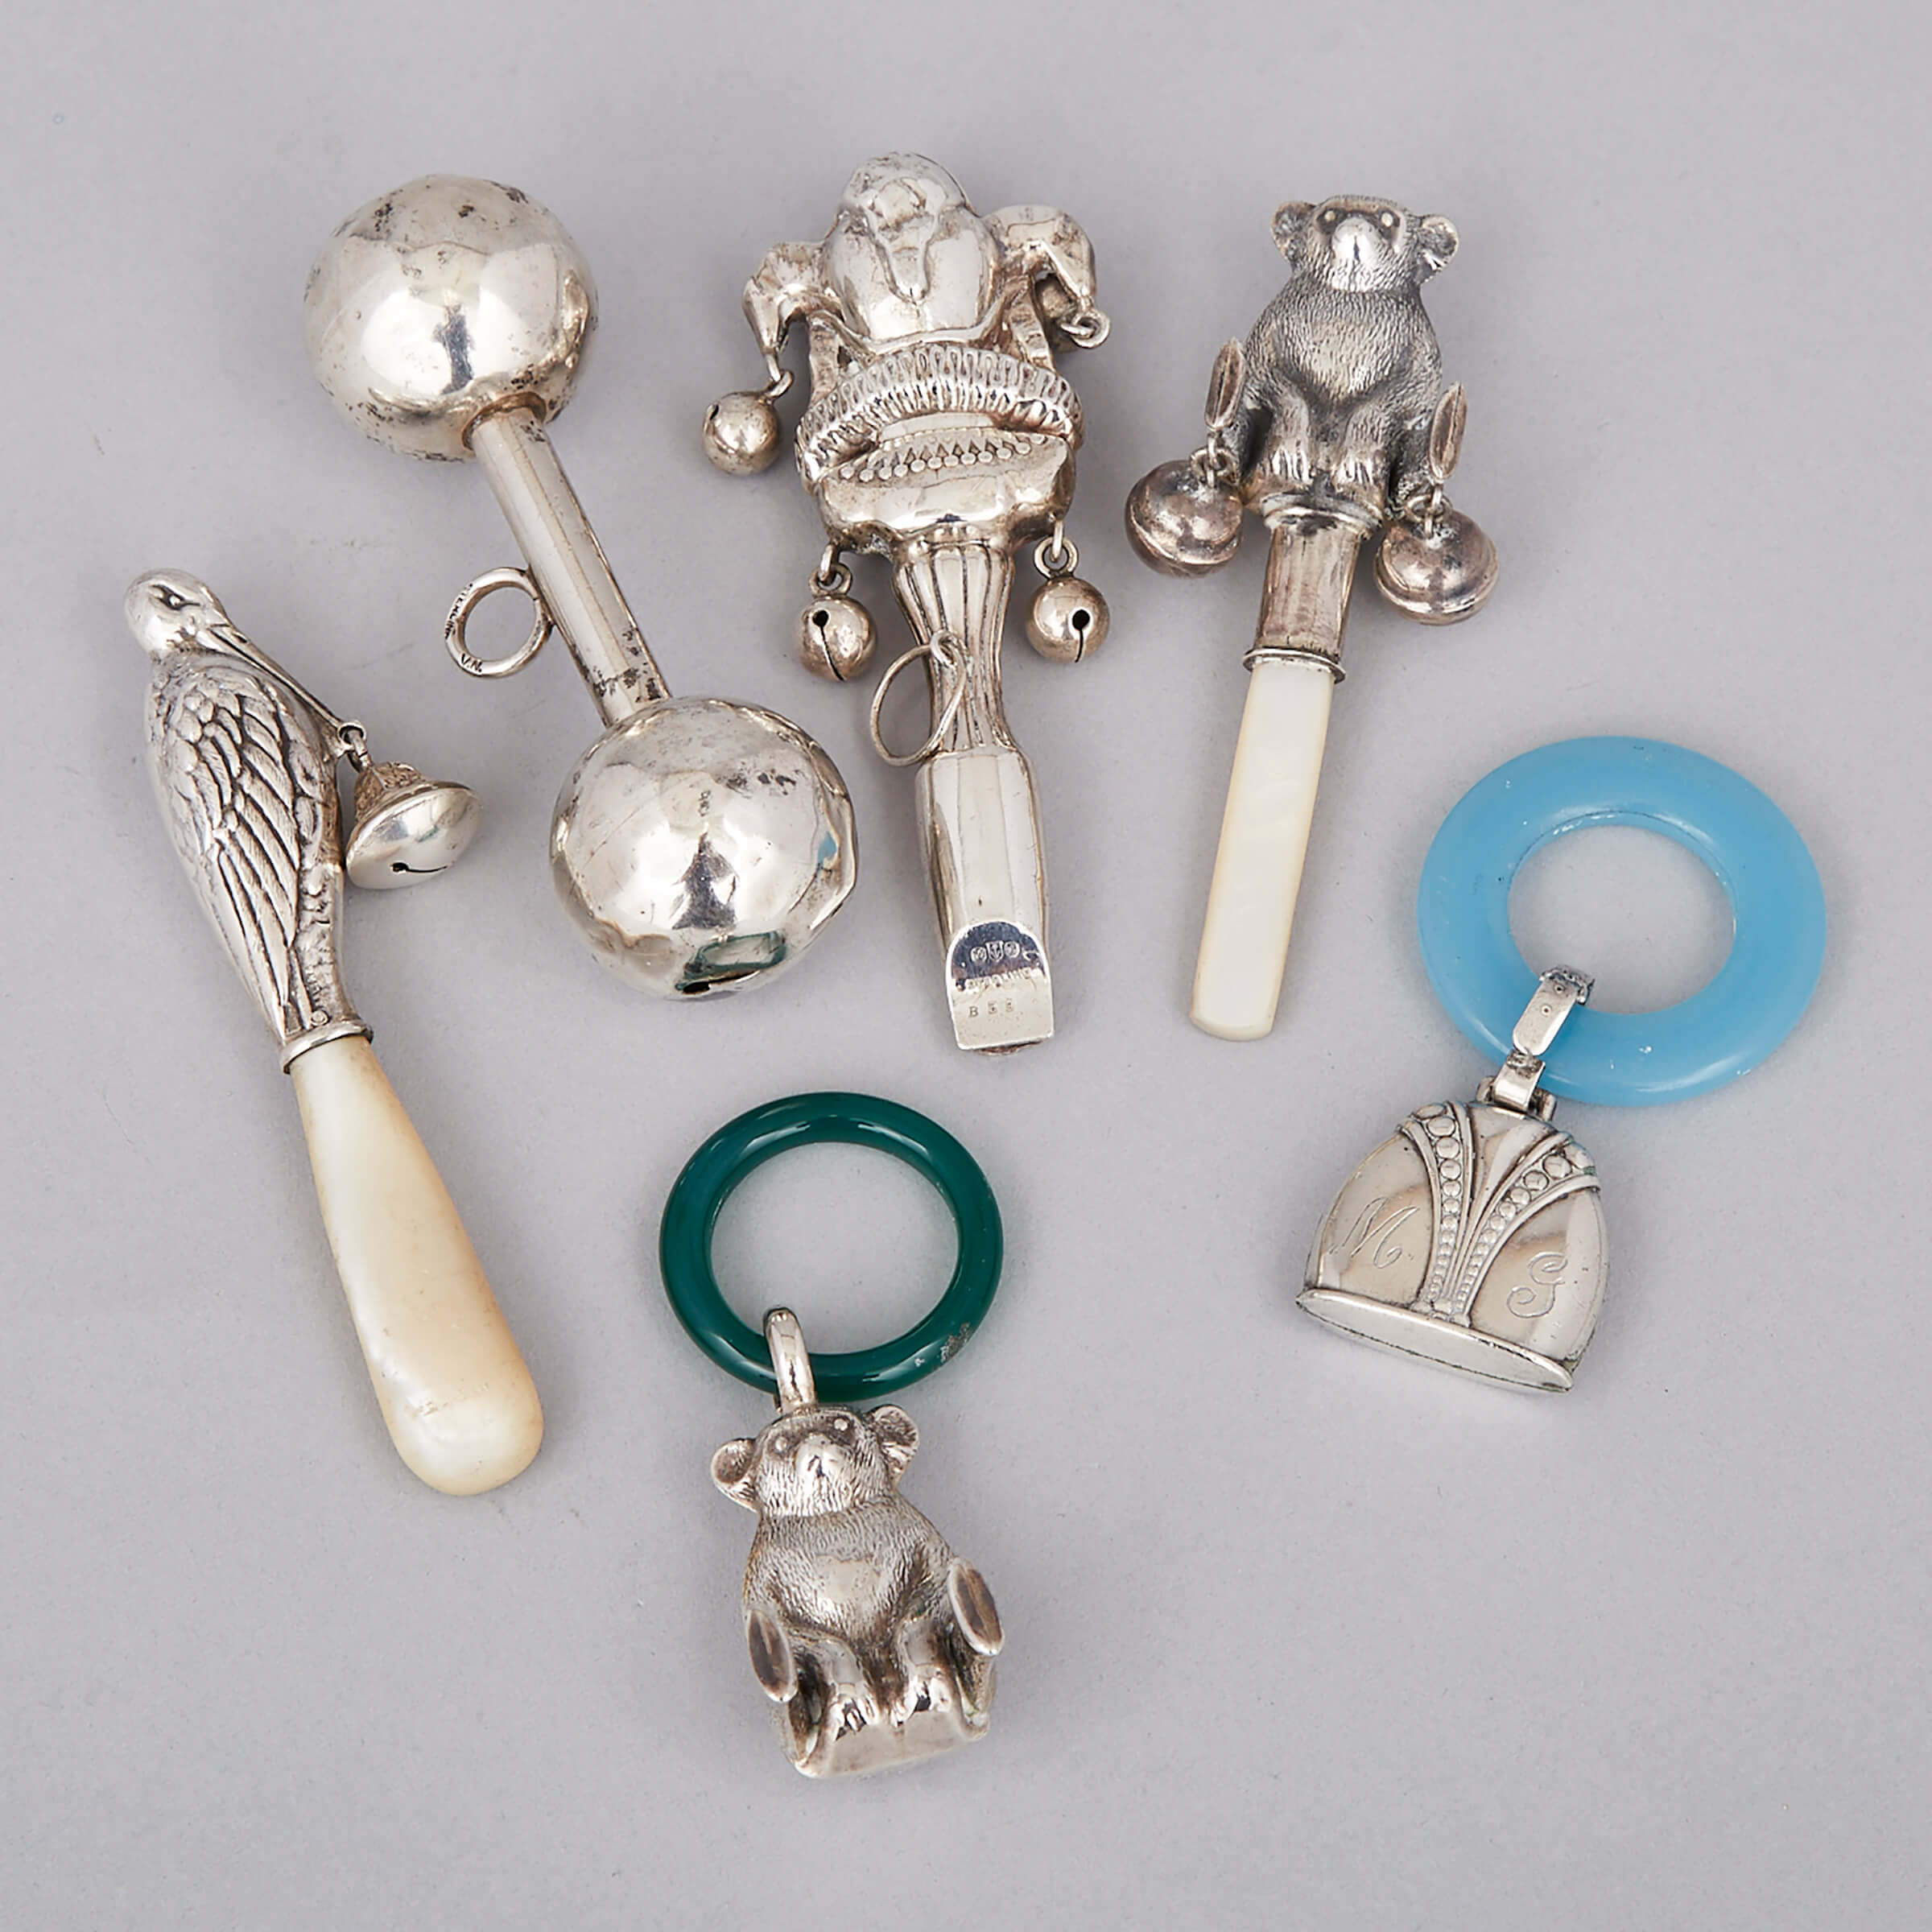 Six Mainly North American Silver Child’s Rattles and Whistles, late 19th/20th century